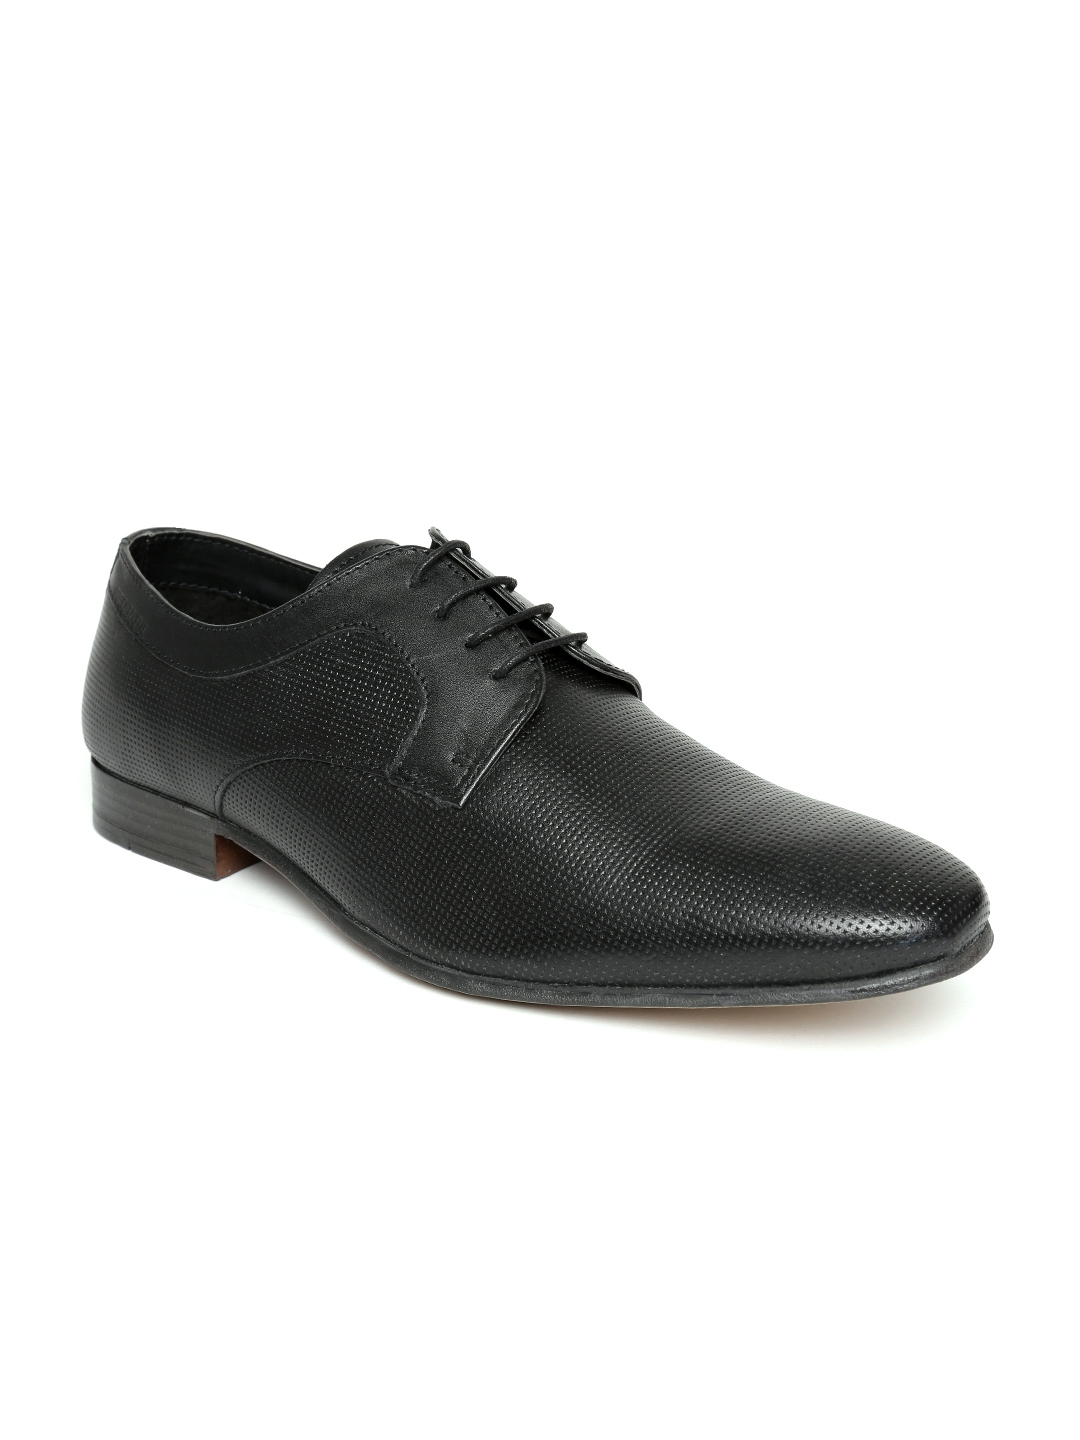 Buy Red Tape Men Black Textured Leather Formal Shoes - Formal Shoes for ...